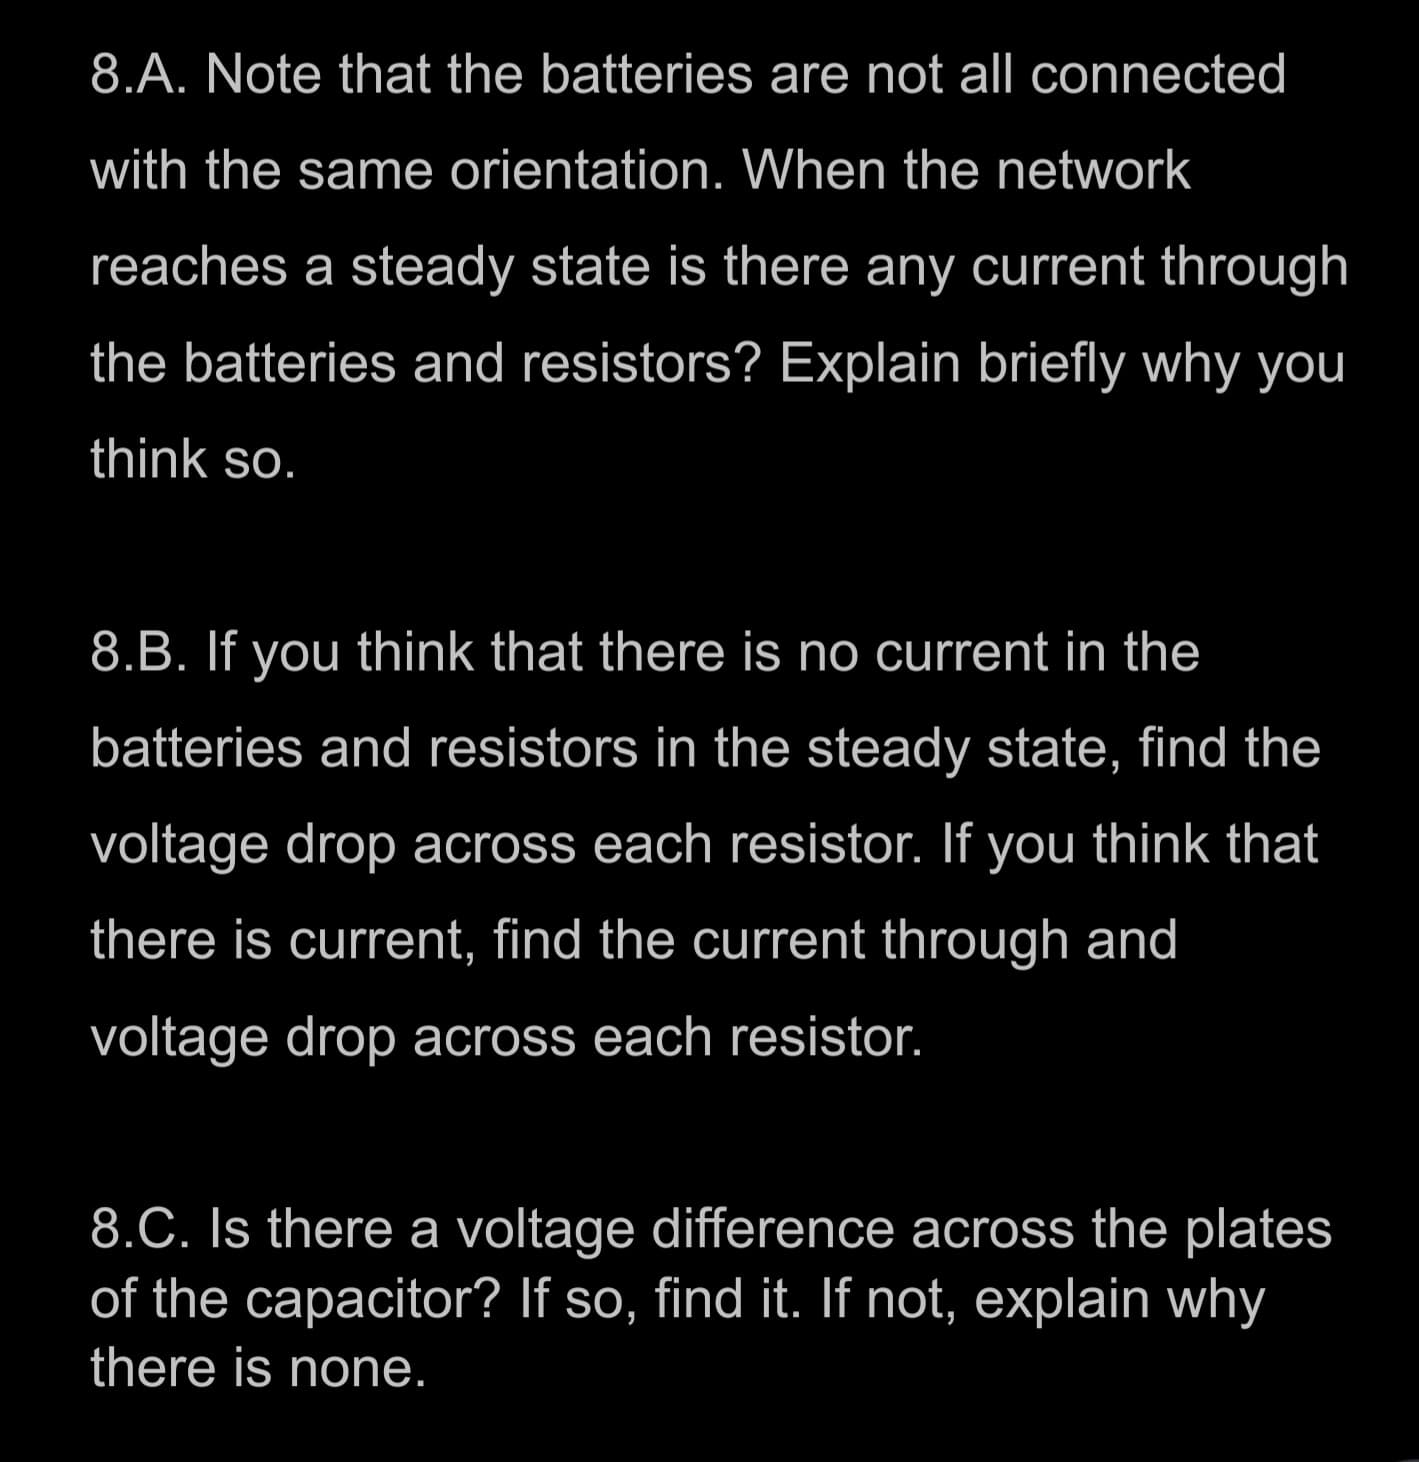 8.A. Note that the batteries are not all connected
with the same orientation. When the network
reaches a steady state is there any current through
the batteries and resistors? Explain briefly why you
think so.
8.B. If you think that there is no current in the
batteries and resistors in the steady state, find the
voltage drop across each resistor. If you think that
there is current, find the current through and
voltage drop across each resistor.
8.C. Is there a voltage difference across the plates
of the capacitor? If so, find it. If not, explain why
there is none.